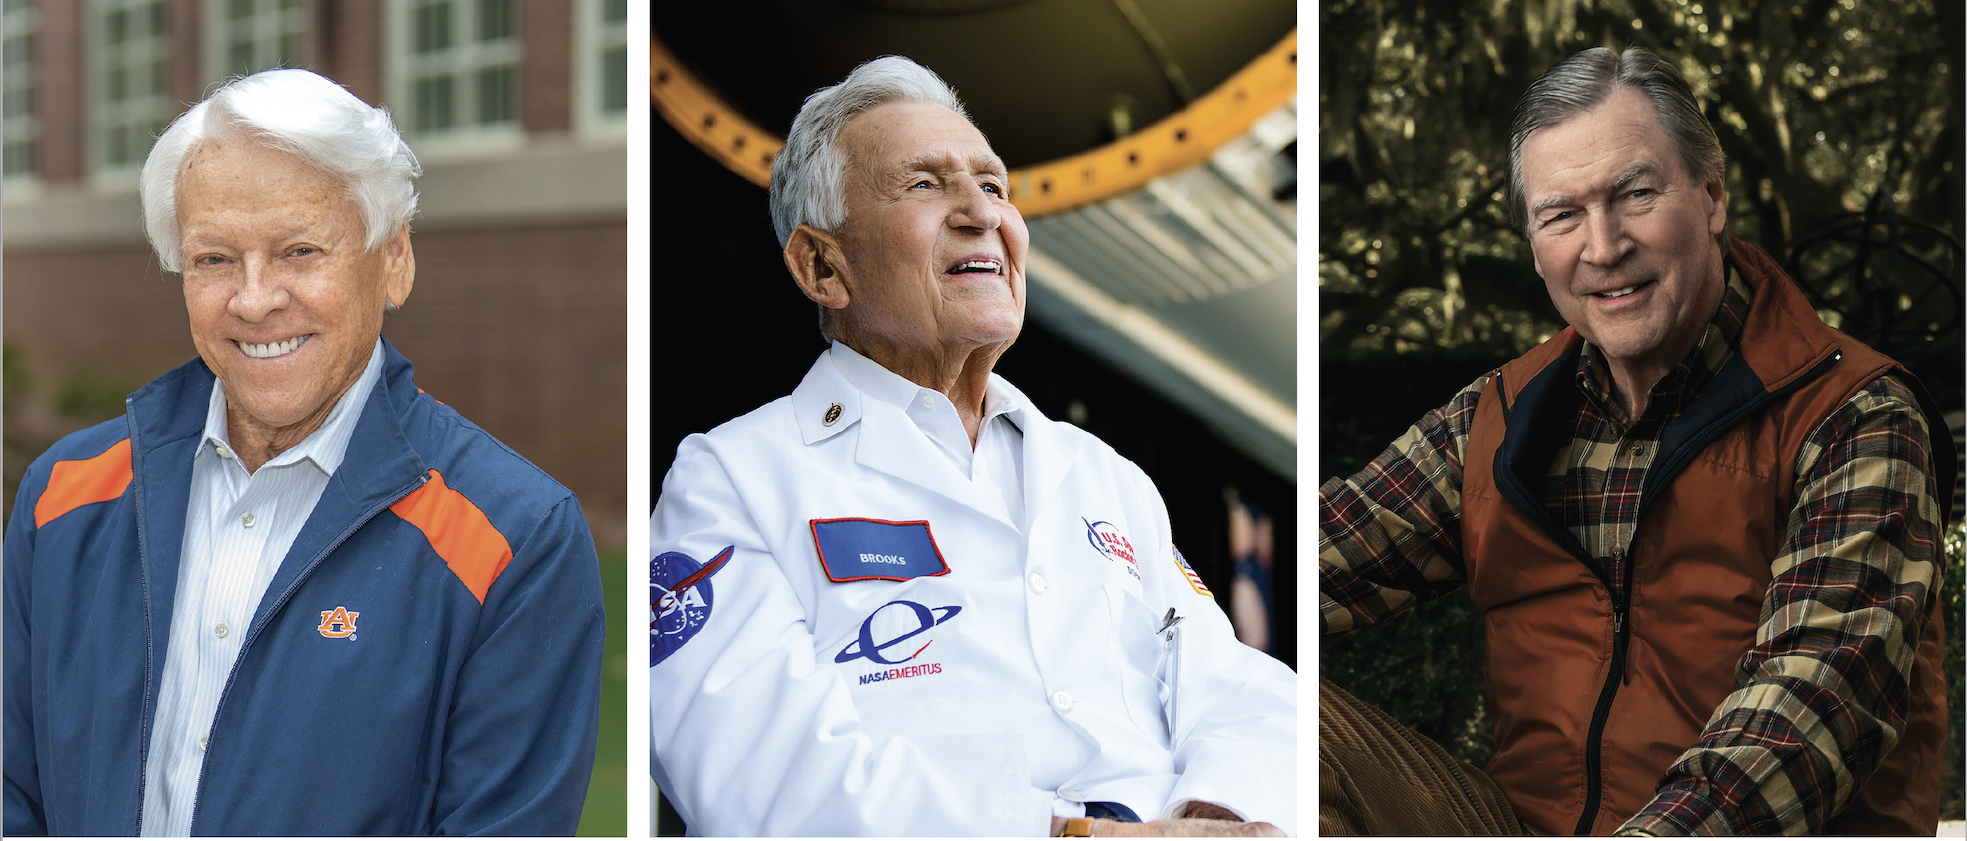 Three Auburn Engineering graduates were selected to receive the highest honor given by the Auburn Alumni Association at Auburn’s 2021 Lifetime Achievement Awards ceremony in June: Raymond
Loyd, ’61 mechanical engineering; Brooks Moore, ’48 electrical engineering; and William Reed, ’70 aviation management.